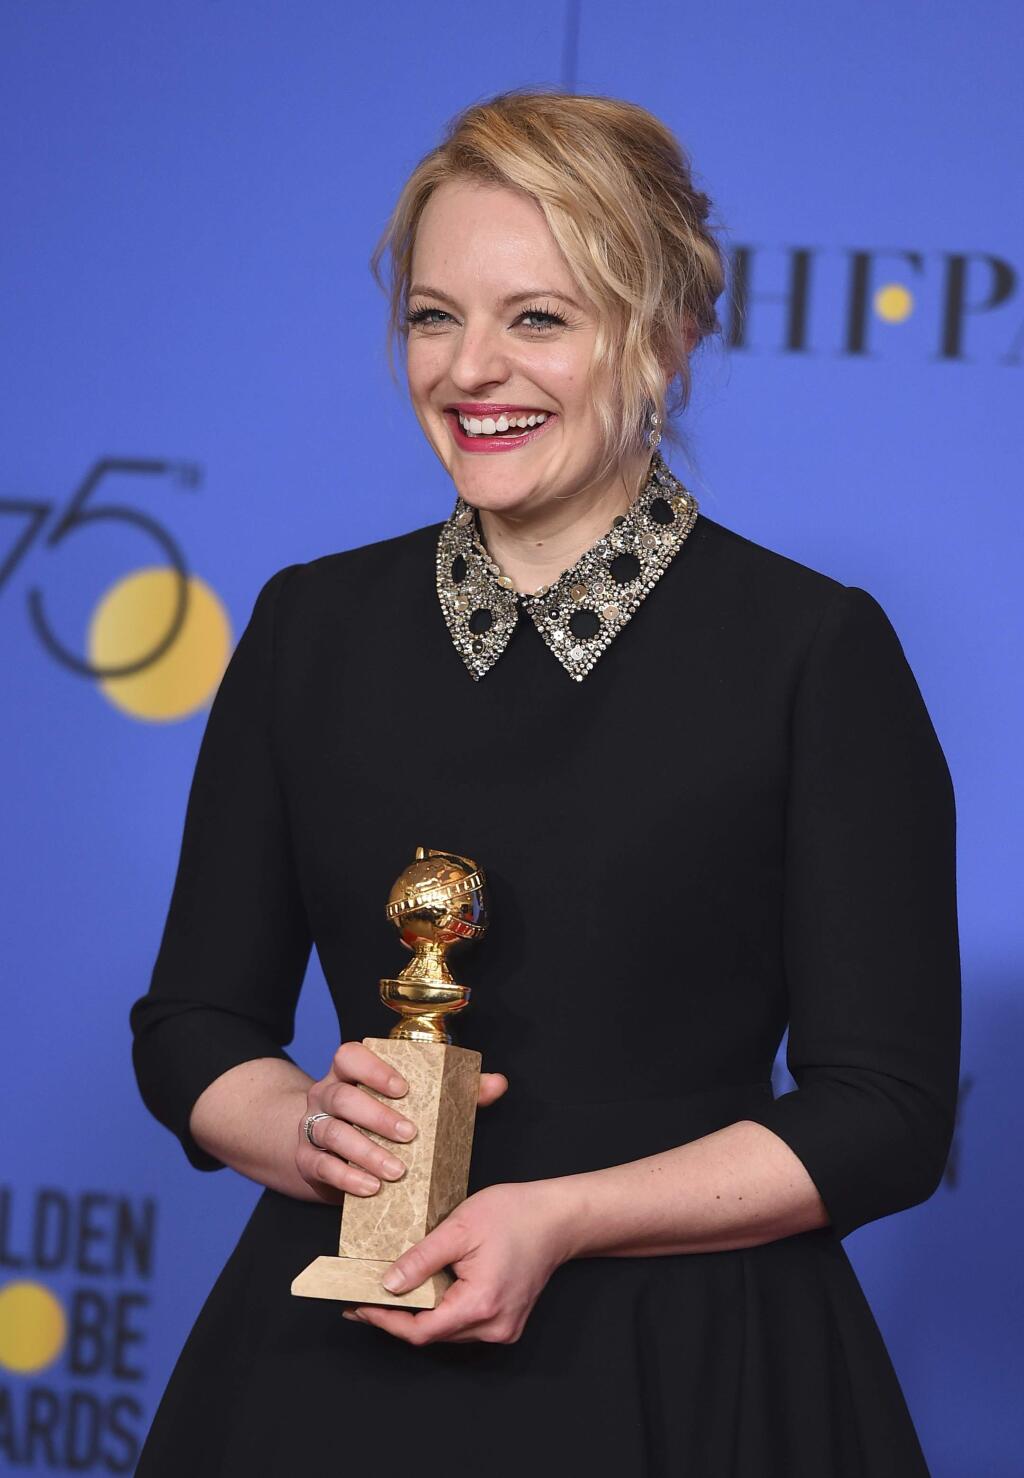 Elisabeth Moss poses in the press room with the award for best performance by an actress in a television series - drama for 'The Handmaid's Tale' at the 75th annual Golden Globe Awards at the Beverly Hilton Hotel on Sunday, Jan. 7, 2018, in Beverly Hills, Calif. (Photo by Jordan Strauss/Invision/AP)